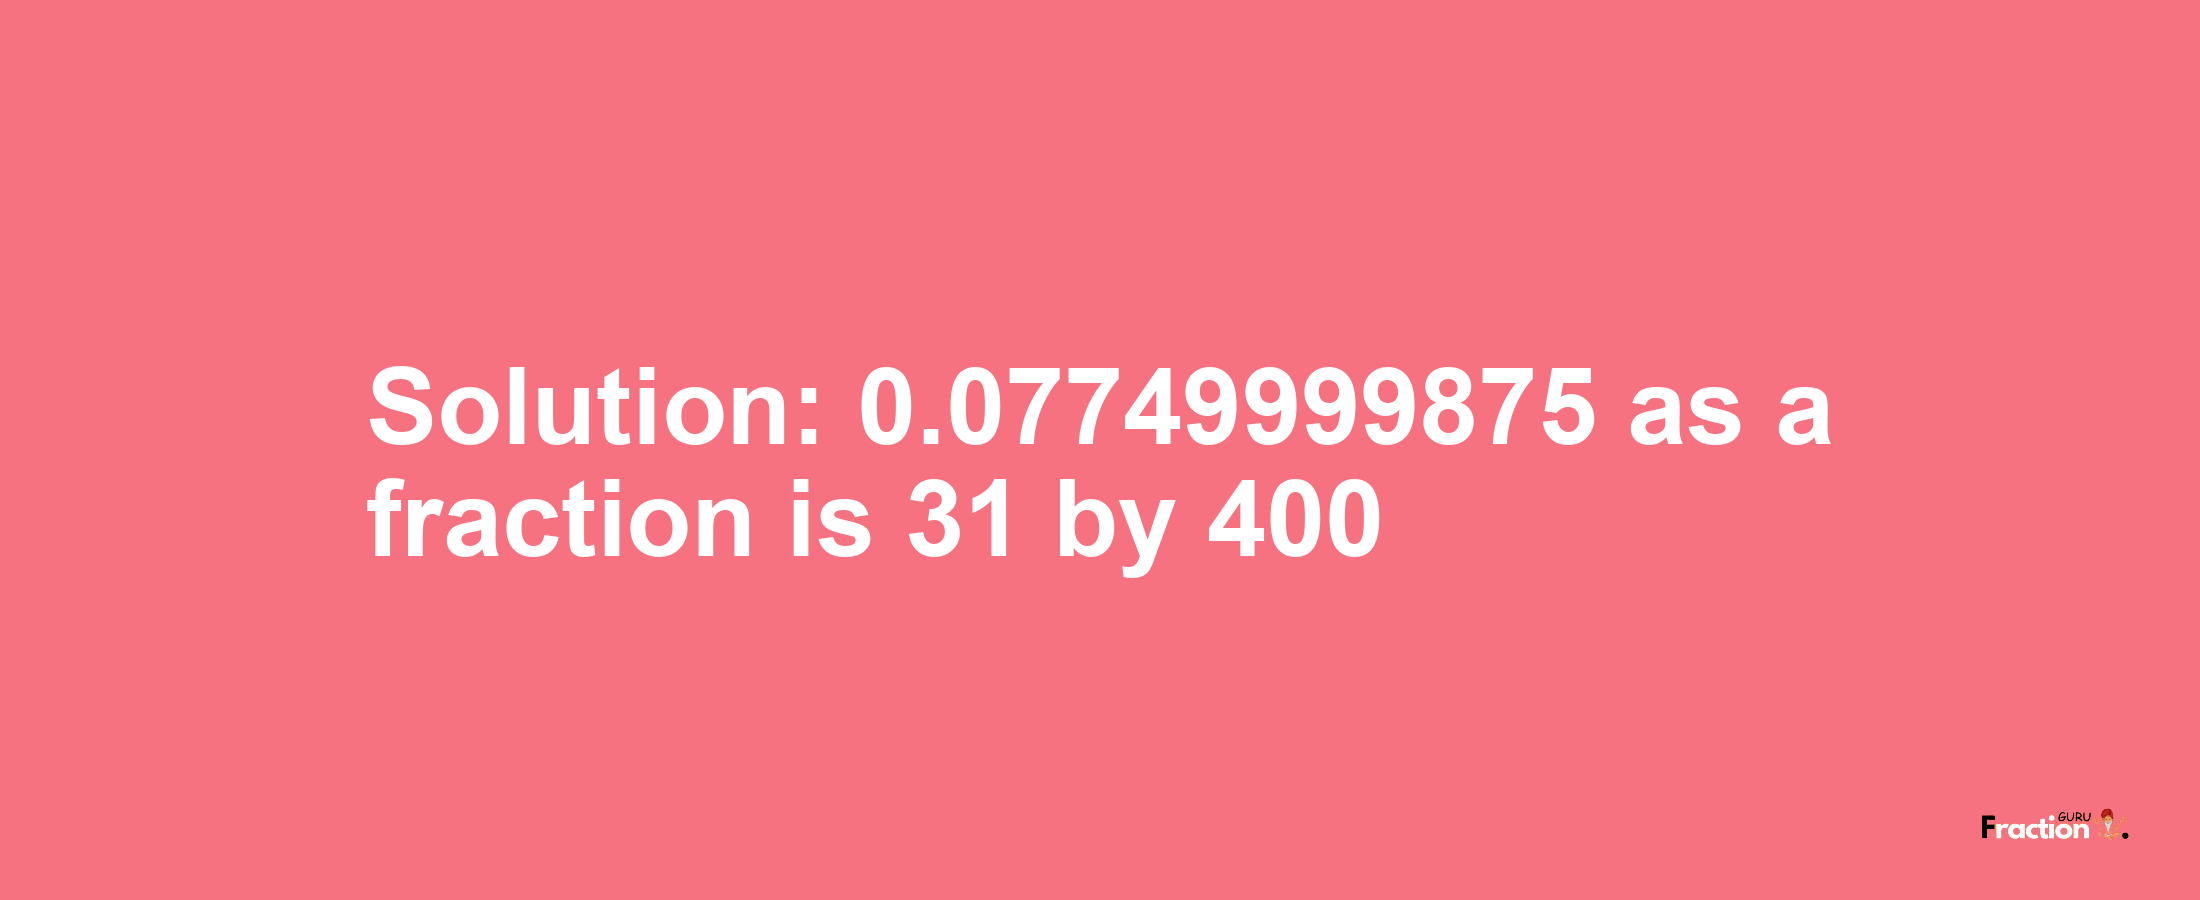 Solution:0.07749999875 as a fraction is 31/400